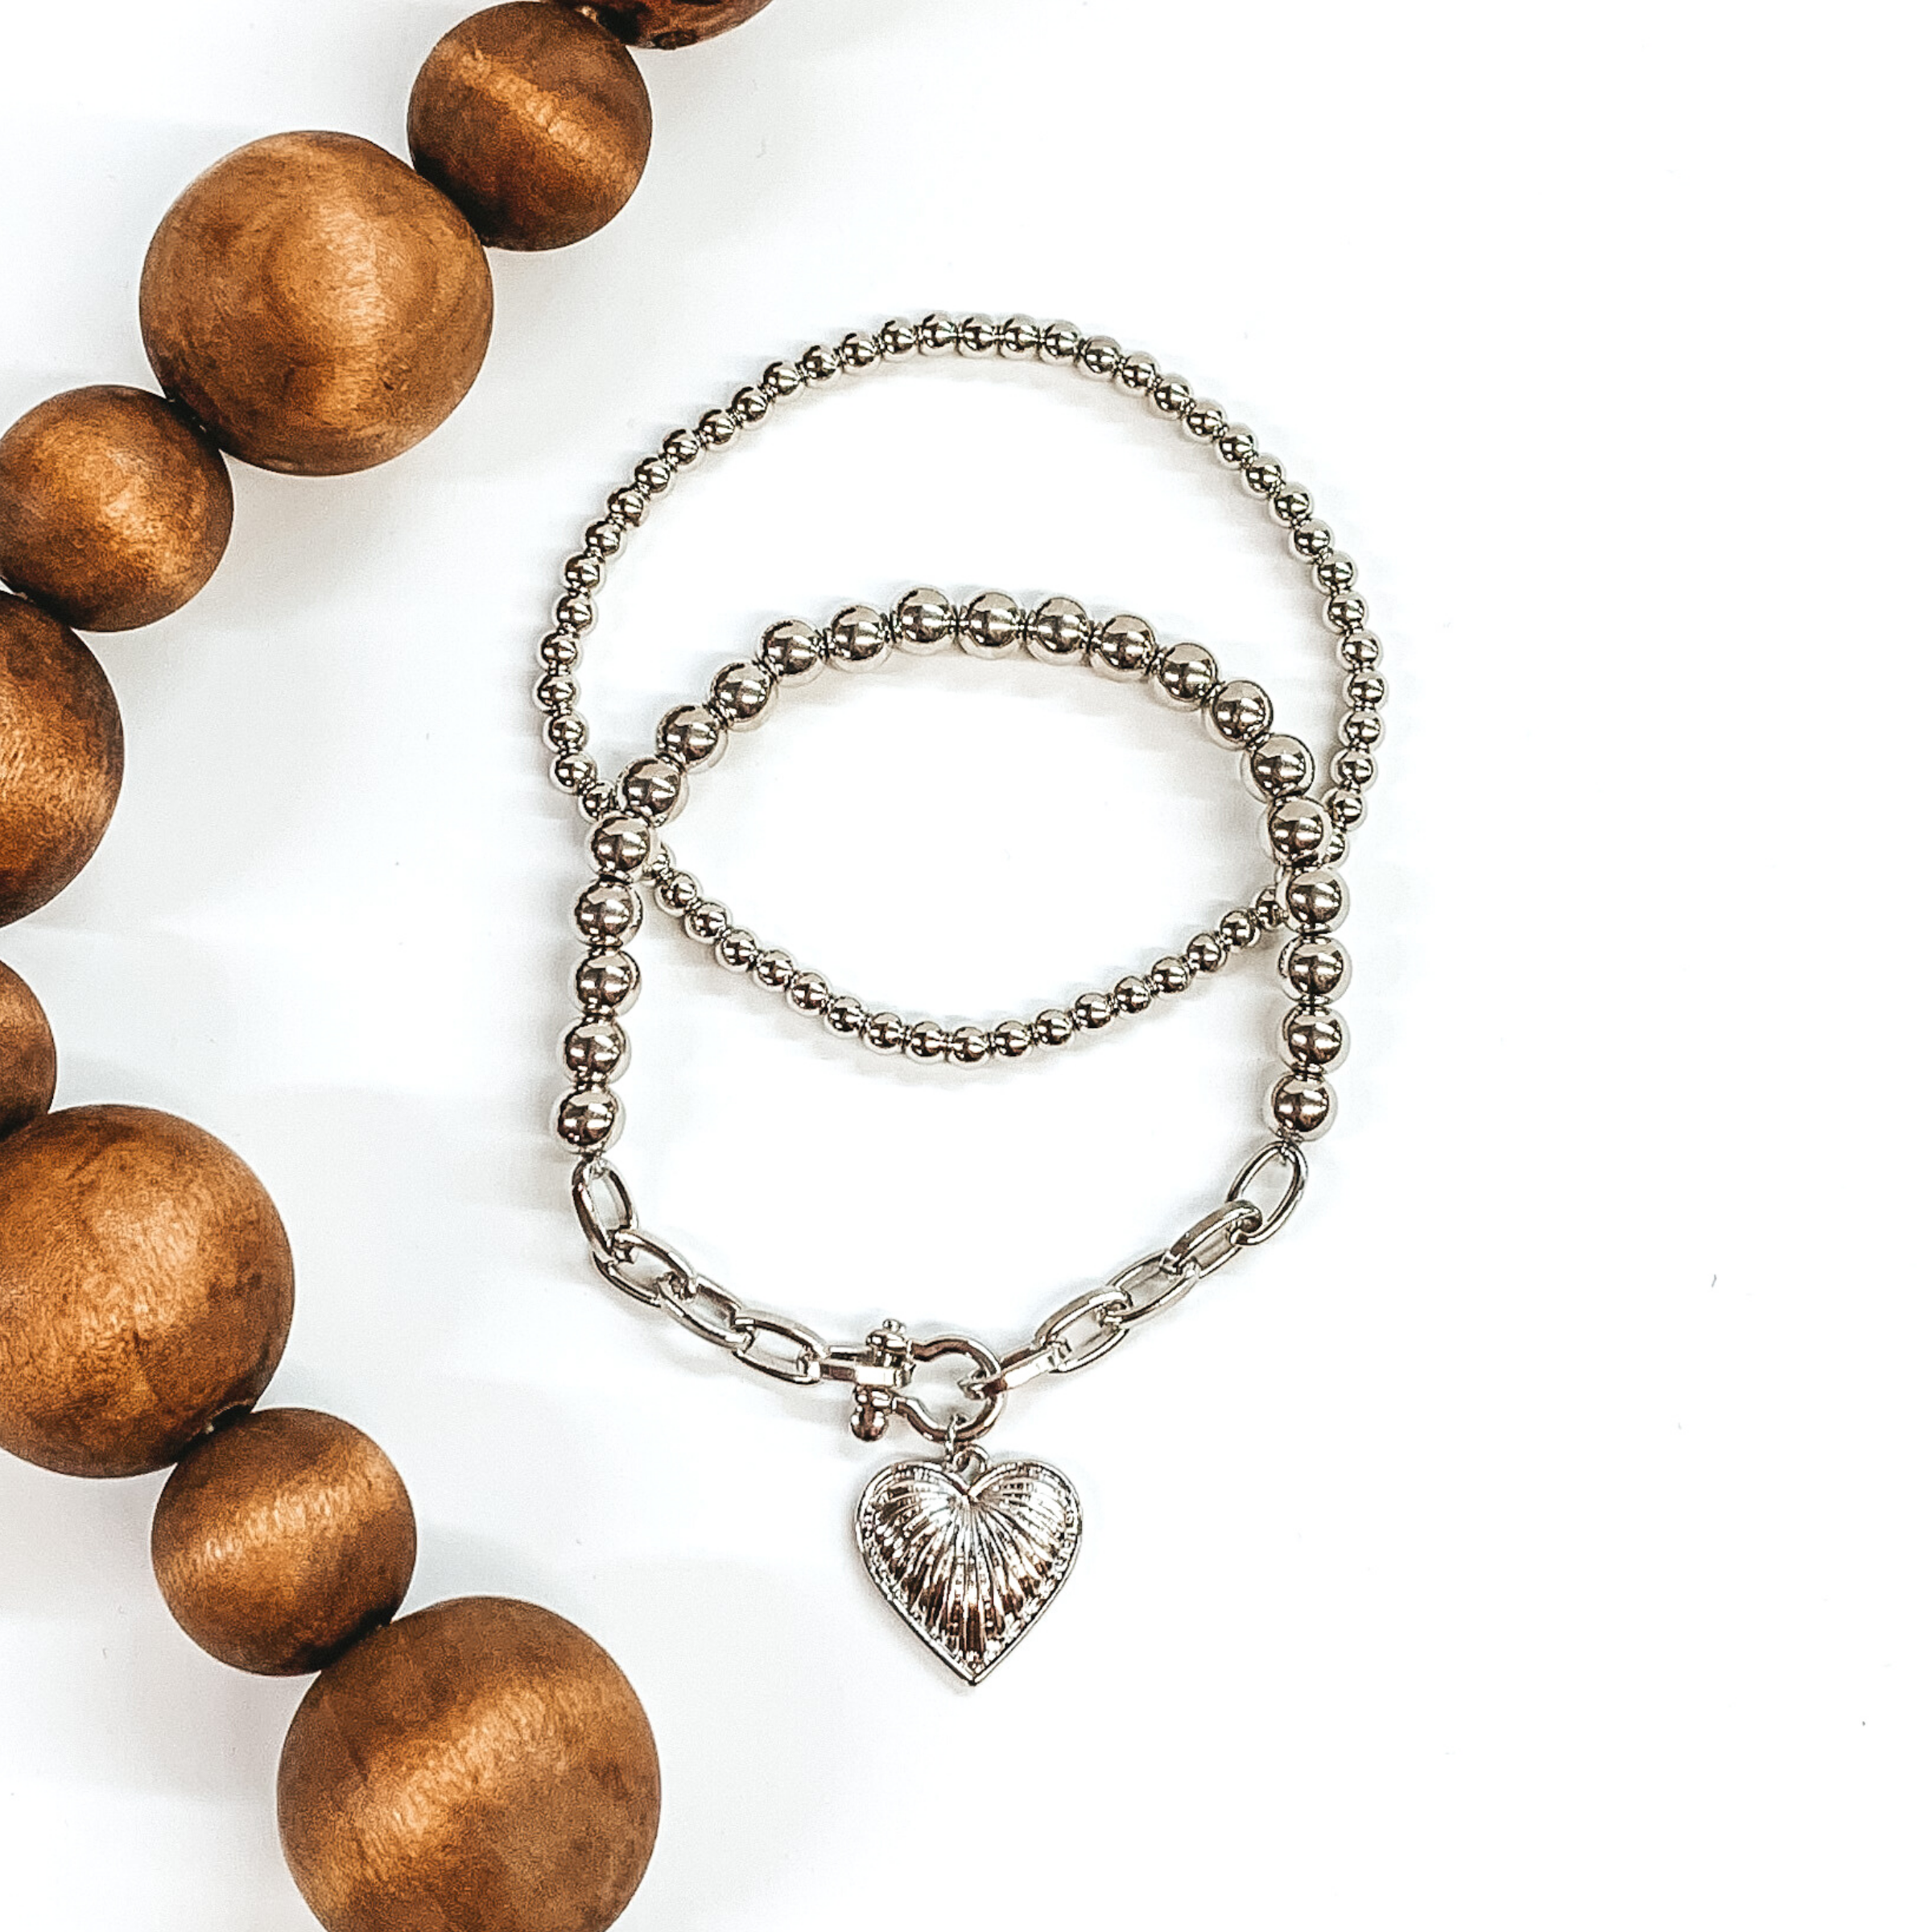  This silver bracelet set includes two beaded bracelets. One is a plain beaded bracelet and the other one has a chained segment with heart charm. This bracelet set is pictured on a white background with brown beads on the side of the picture.